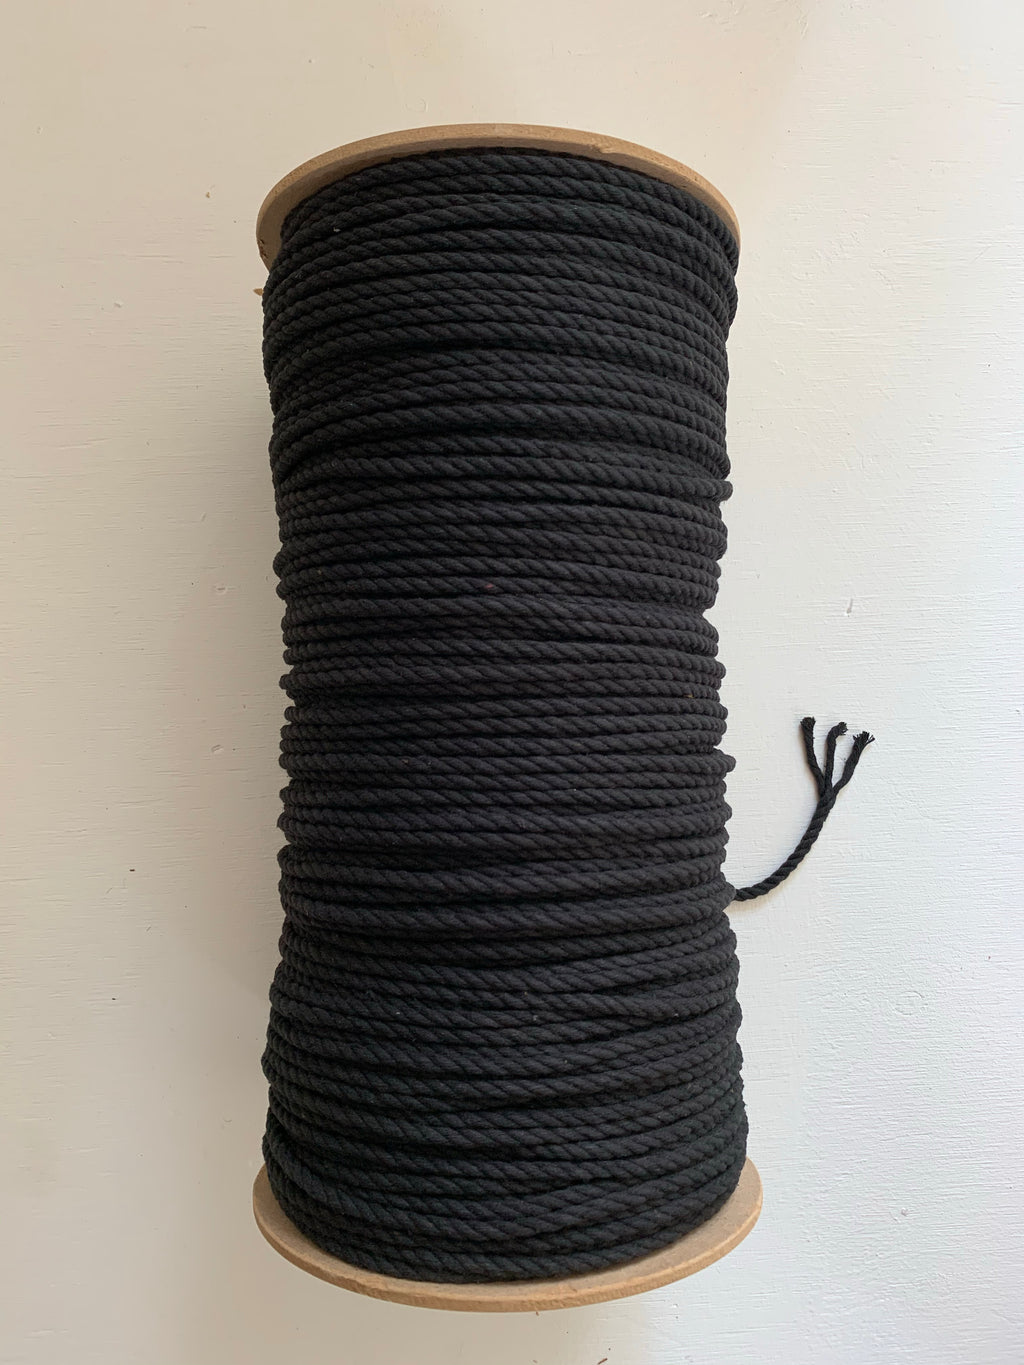 5mm 3-Ply Rope - Approx. 300m - Black